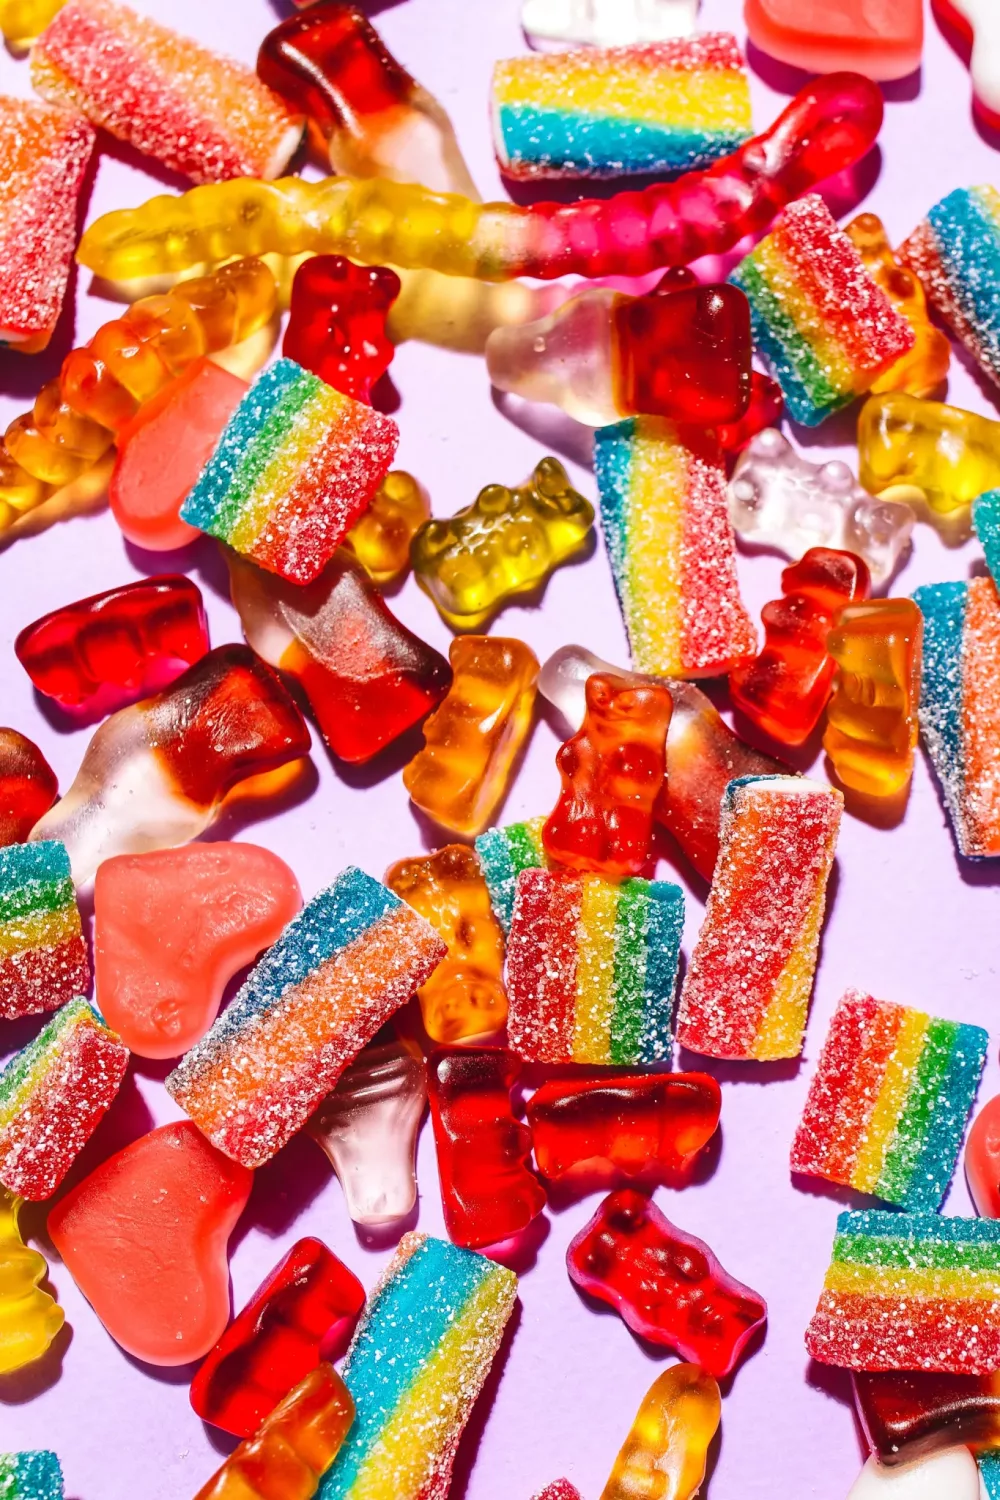 All kinds of brightly colored gummy candies